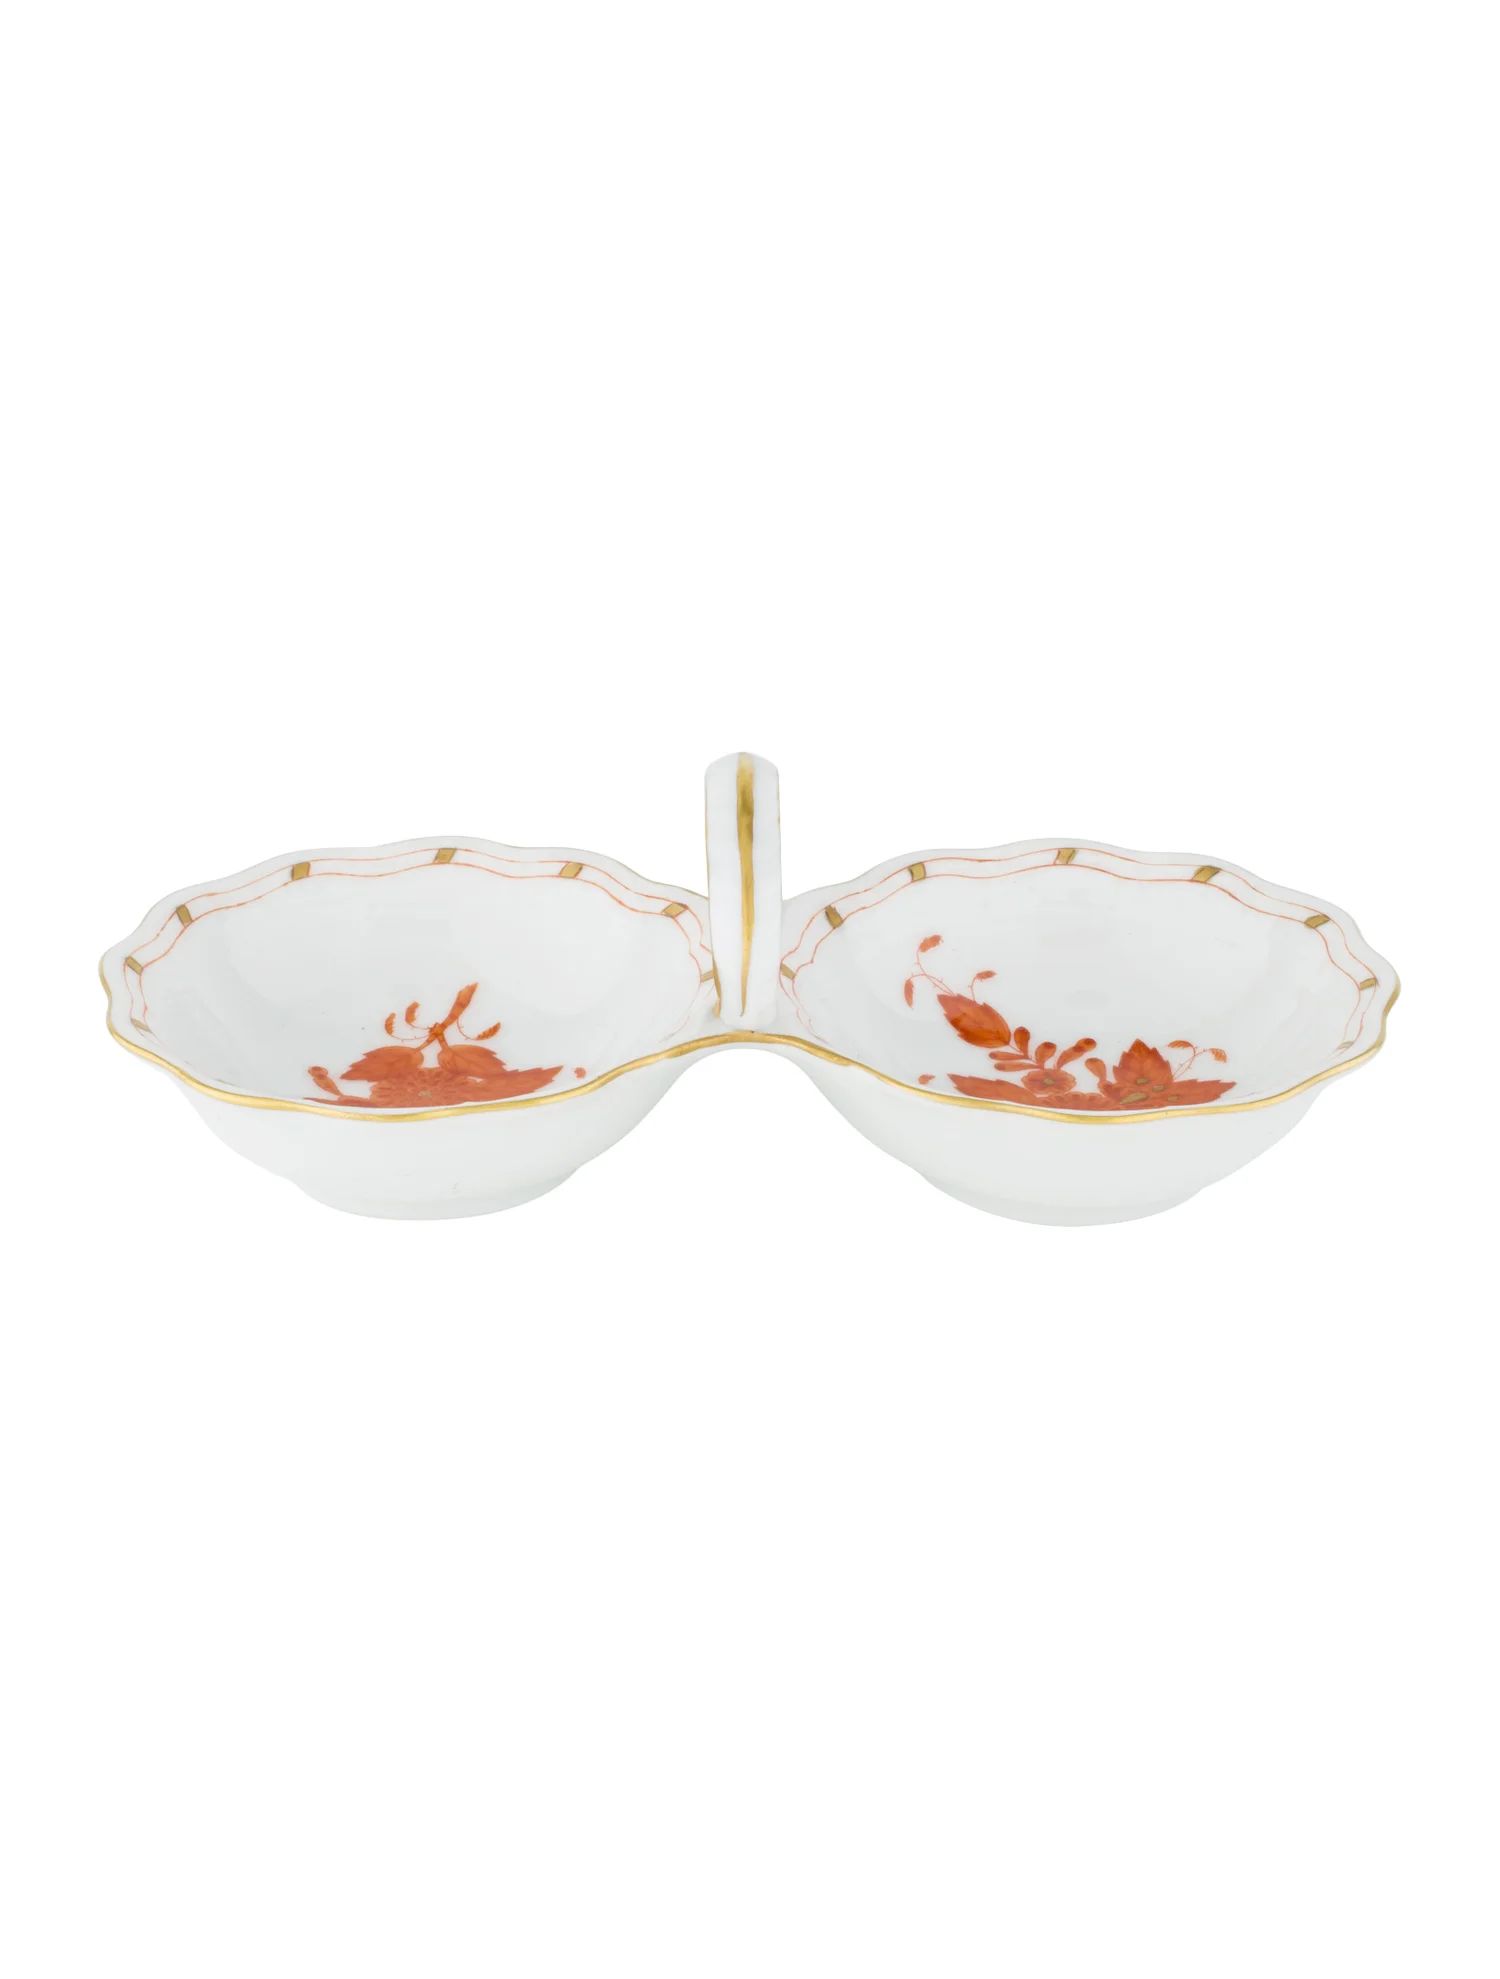 Herend Chinese Bouquet Salt Dip - Tabletop & Kitchen -
          HND25332 | The RealReal | The RealReal